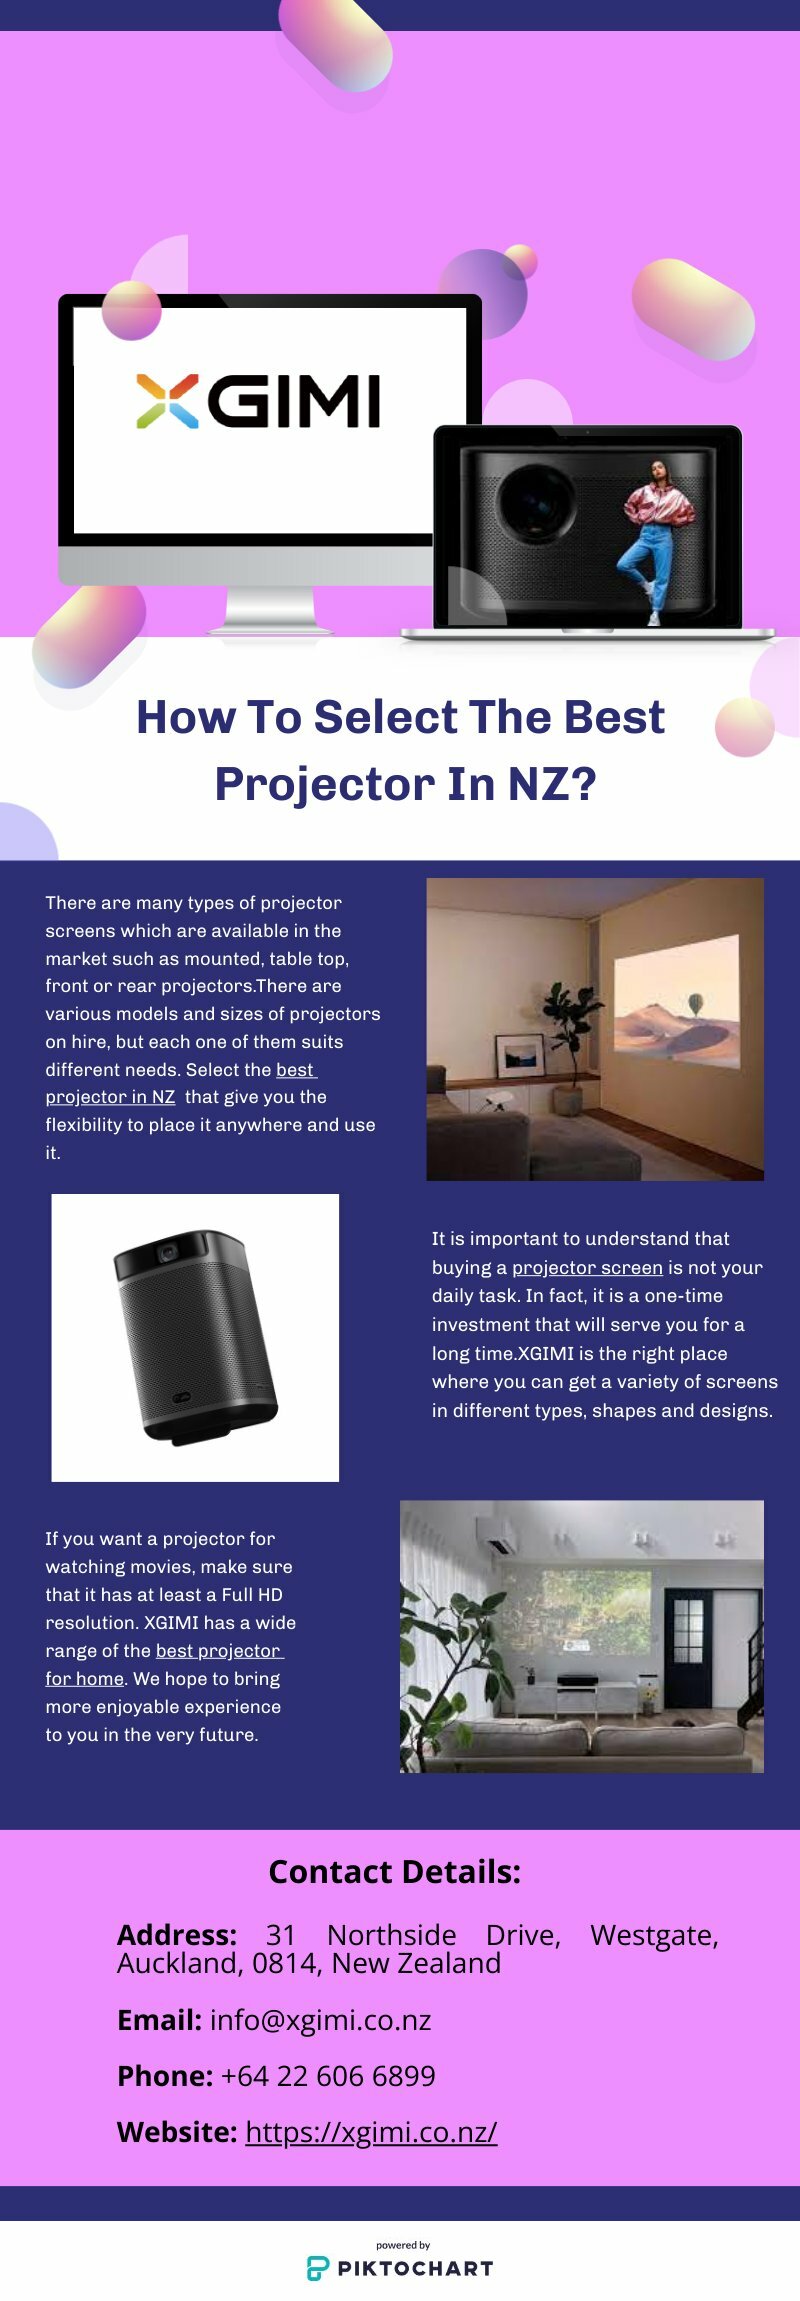 How To Select The Best Projector In NZ | Piktochart Visual Editor